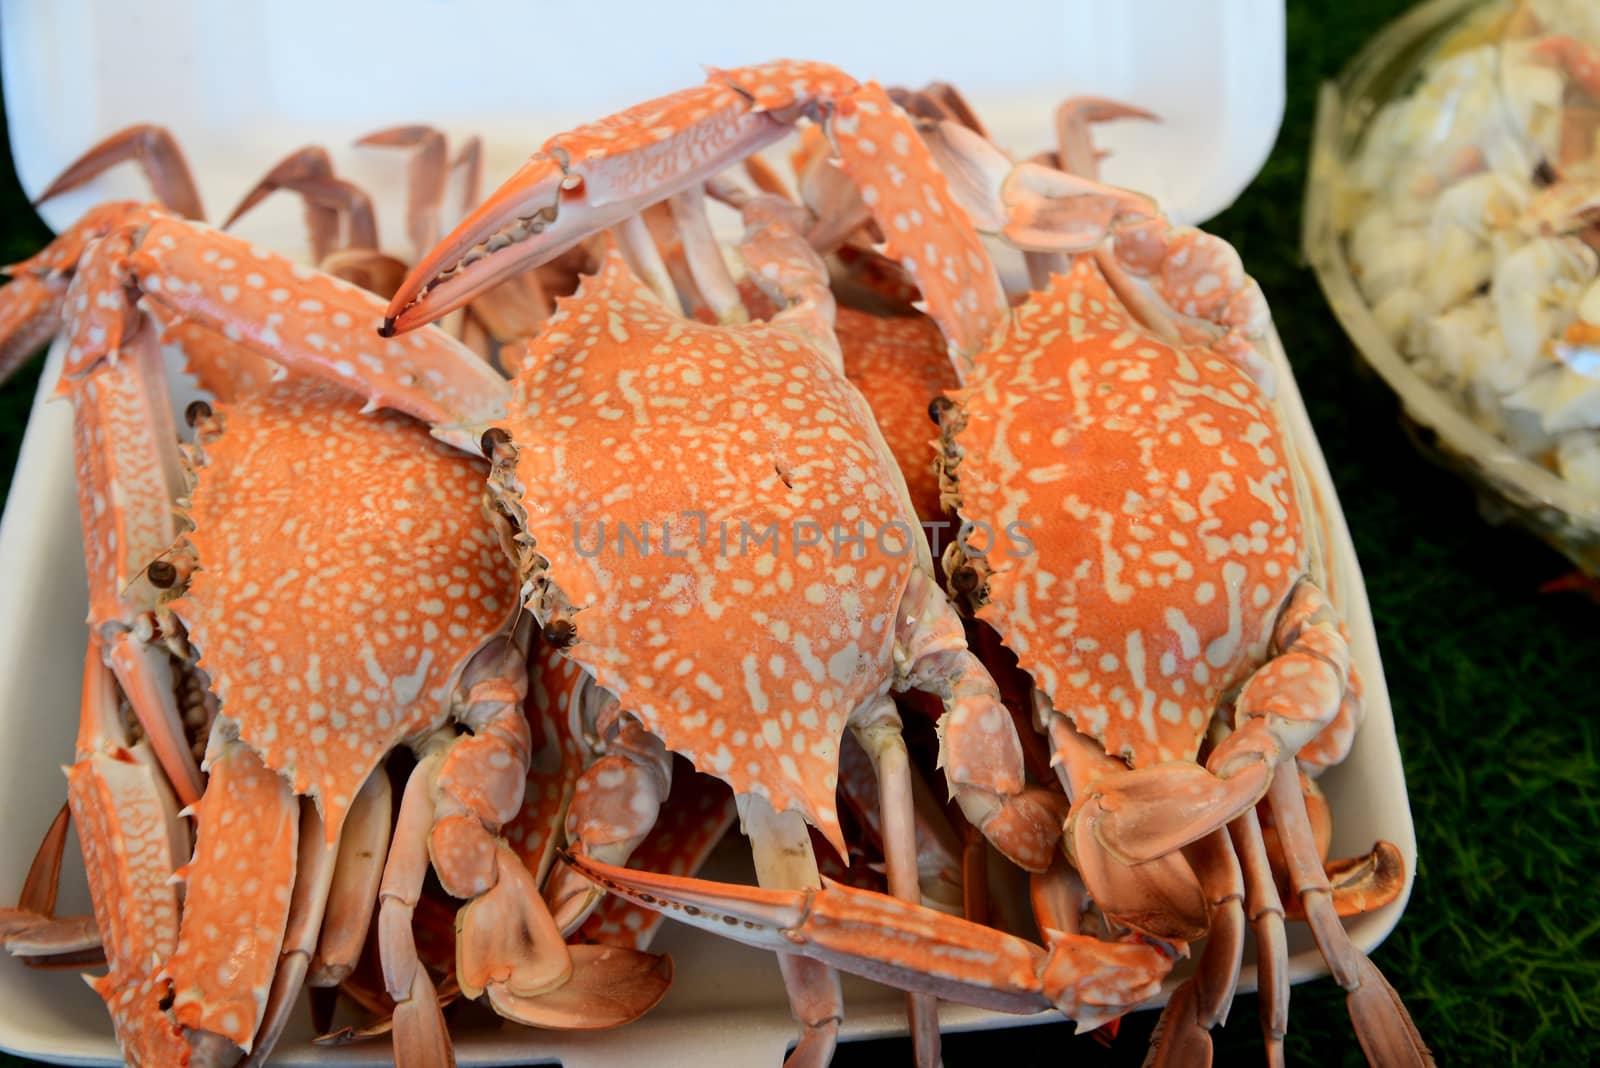 Steamed Blue Crabs in foam box for sell by ideation90